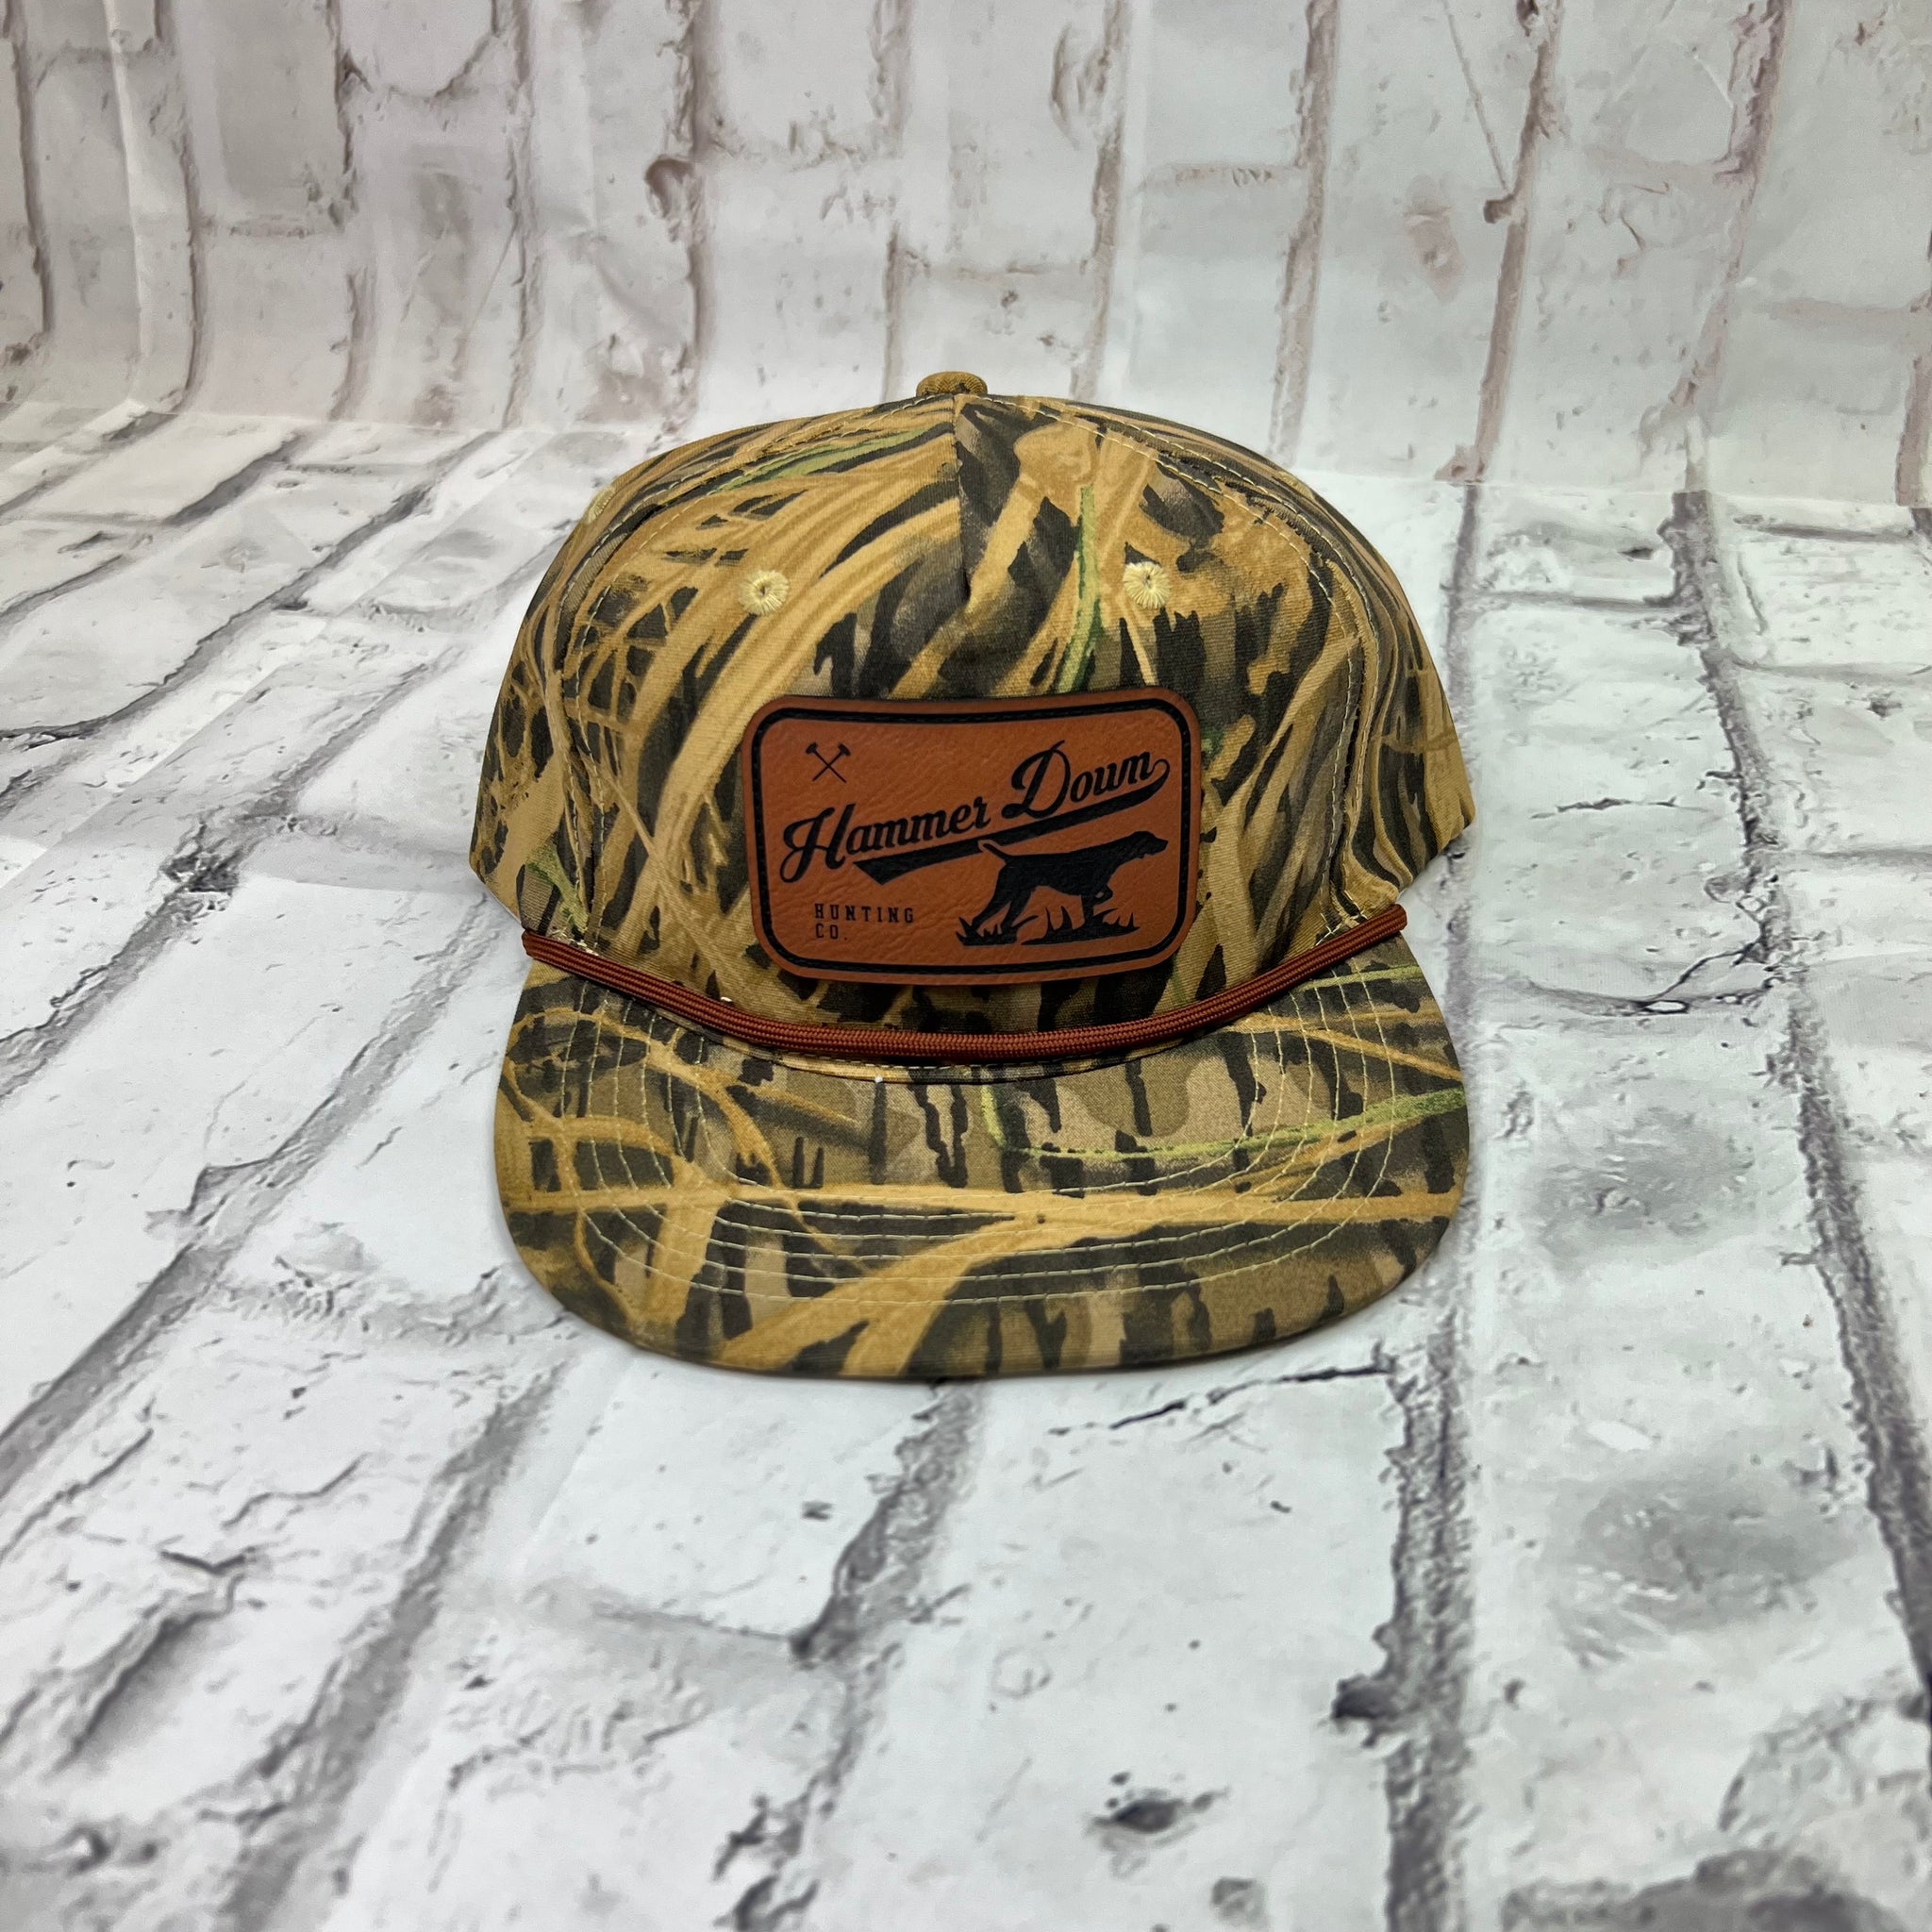 Hammer Down "Hunting Co" Hat - Wetlands Camo with Rope